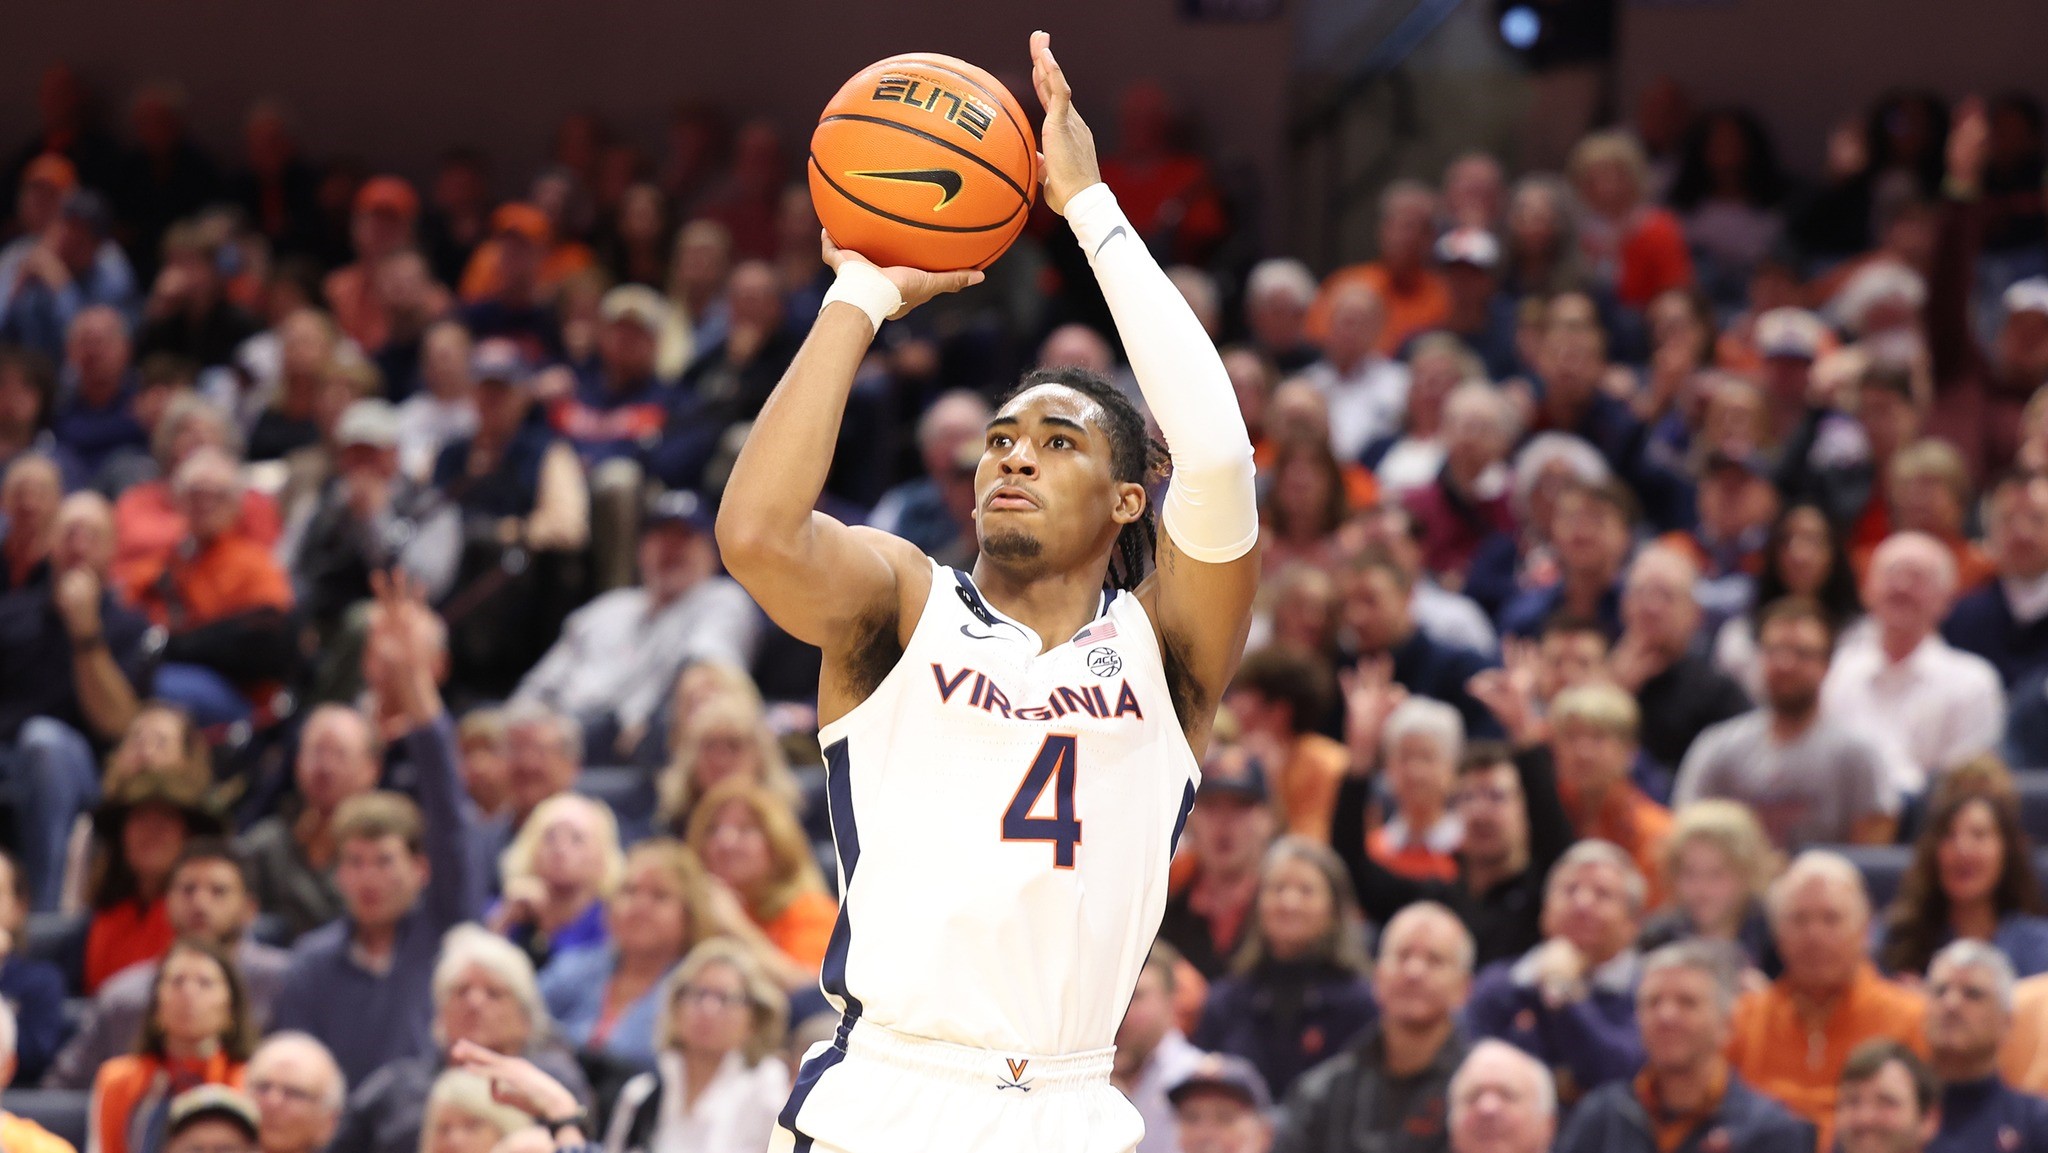 Virginia Basketball vs. James Madison | Scores and Live Updates